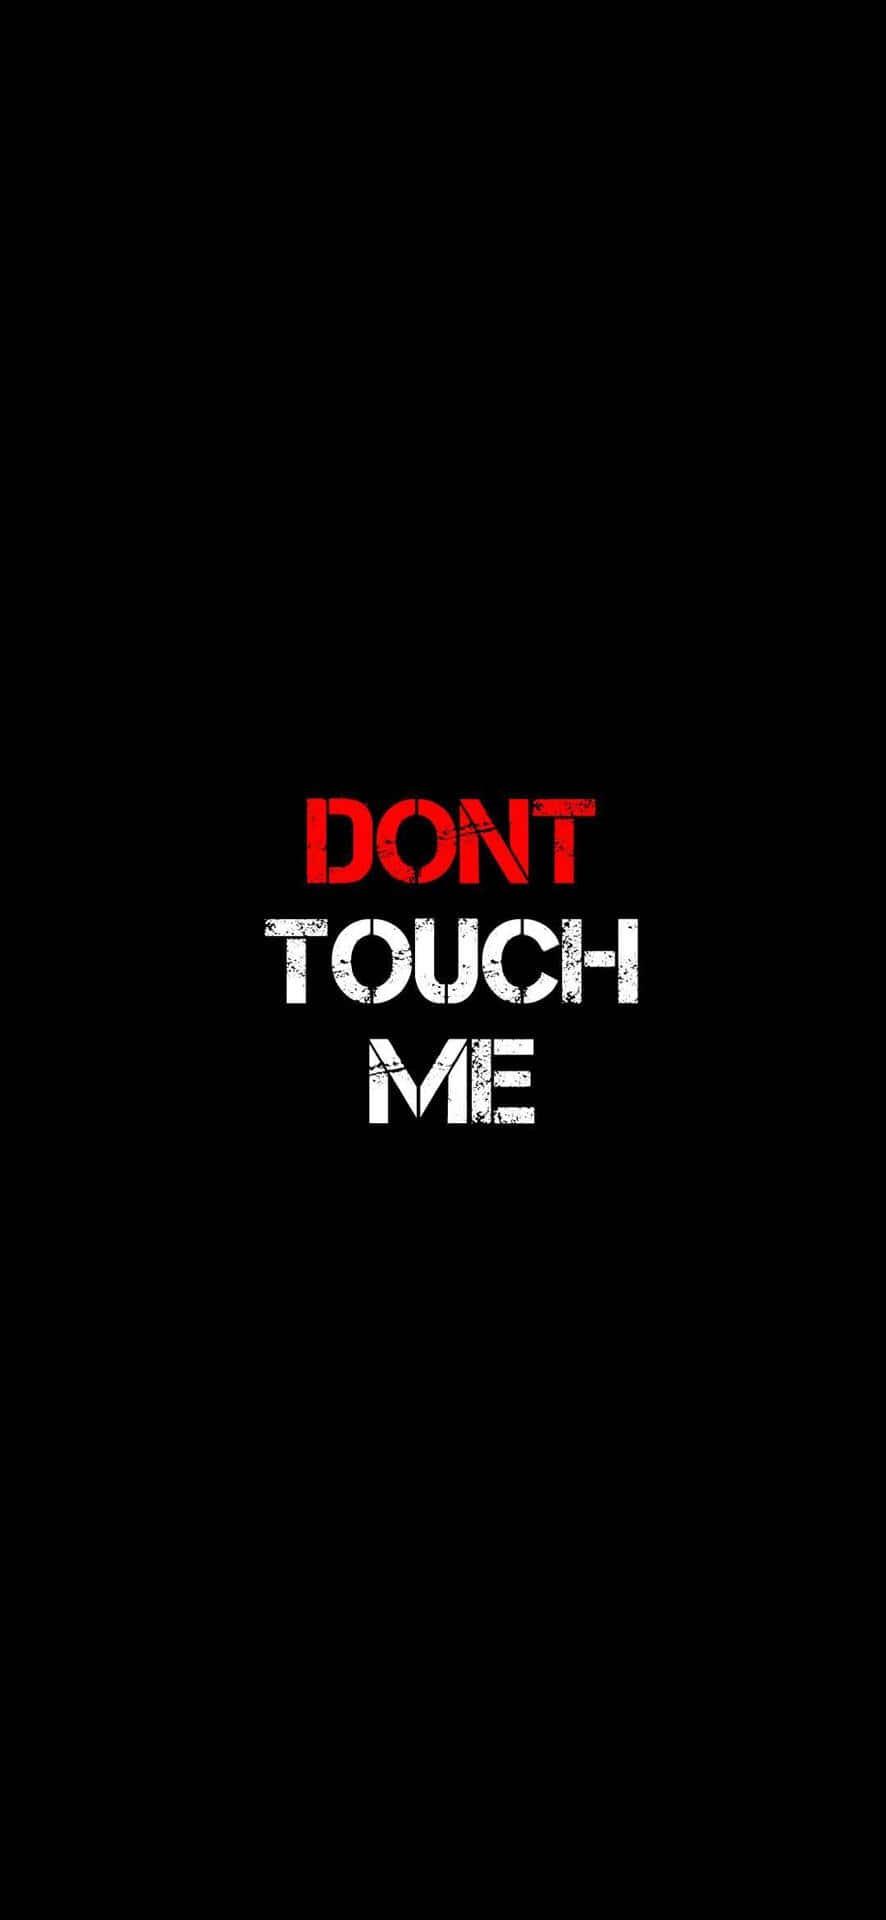 Don't Touch Me - Hd Wallpapers Background